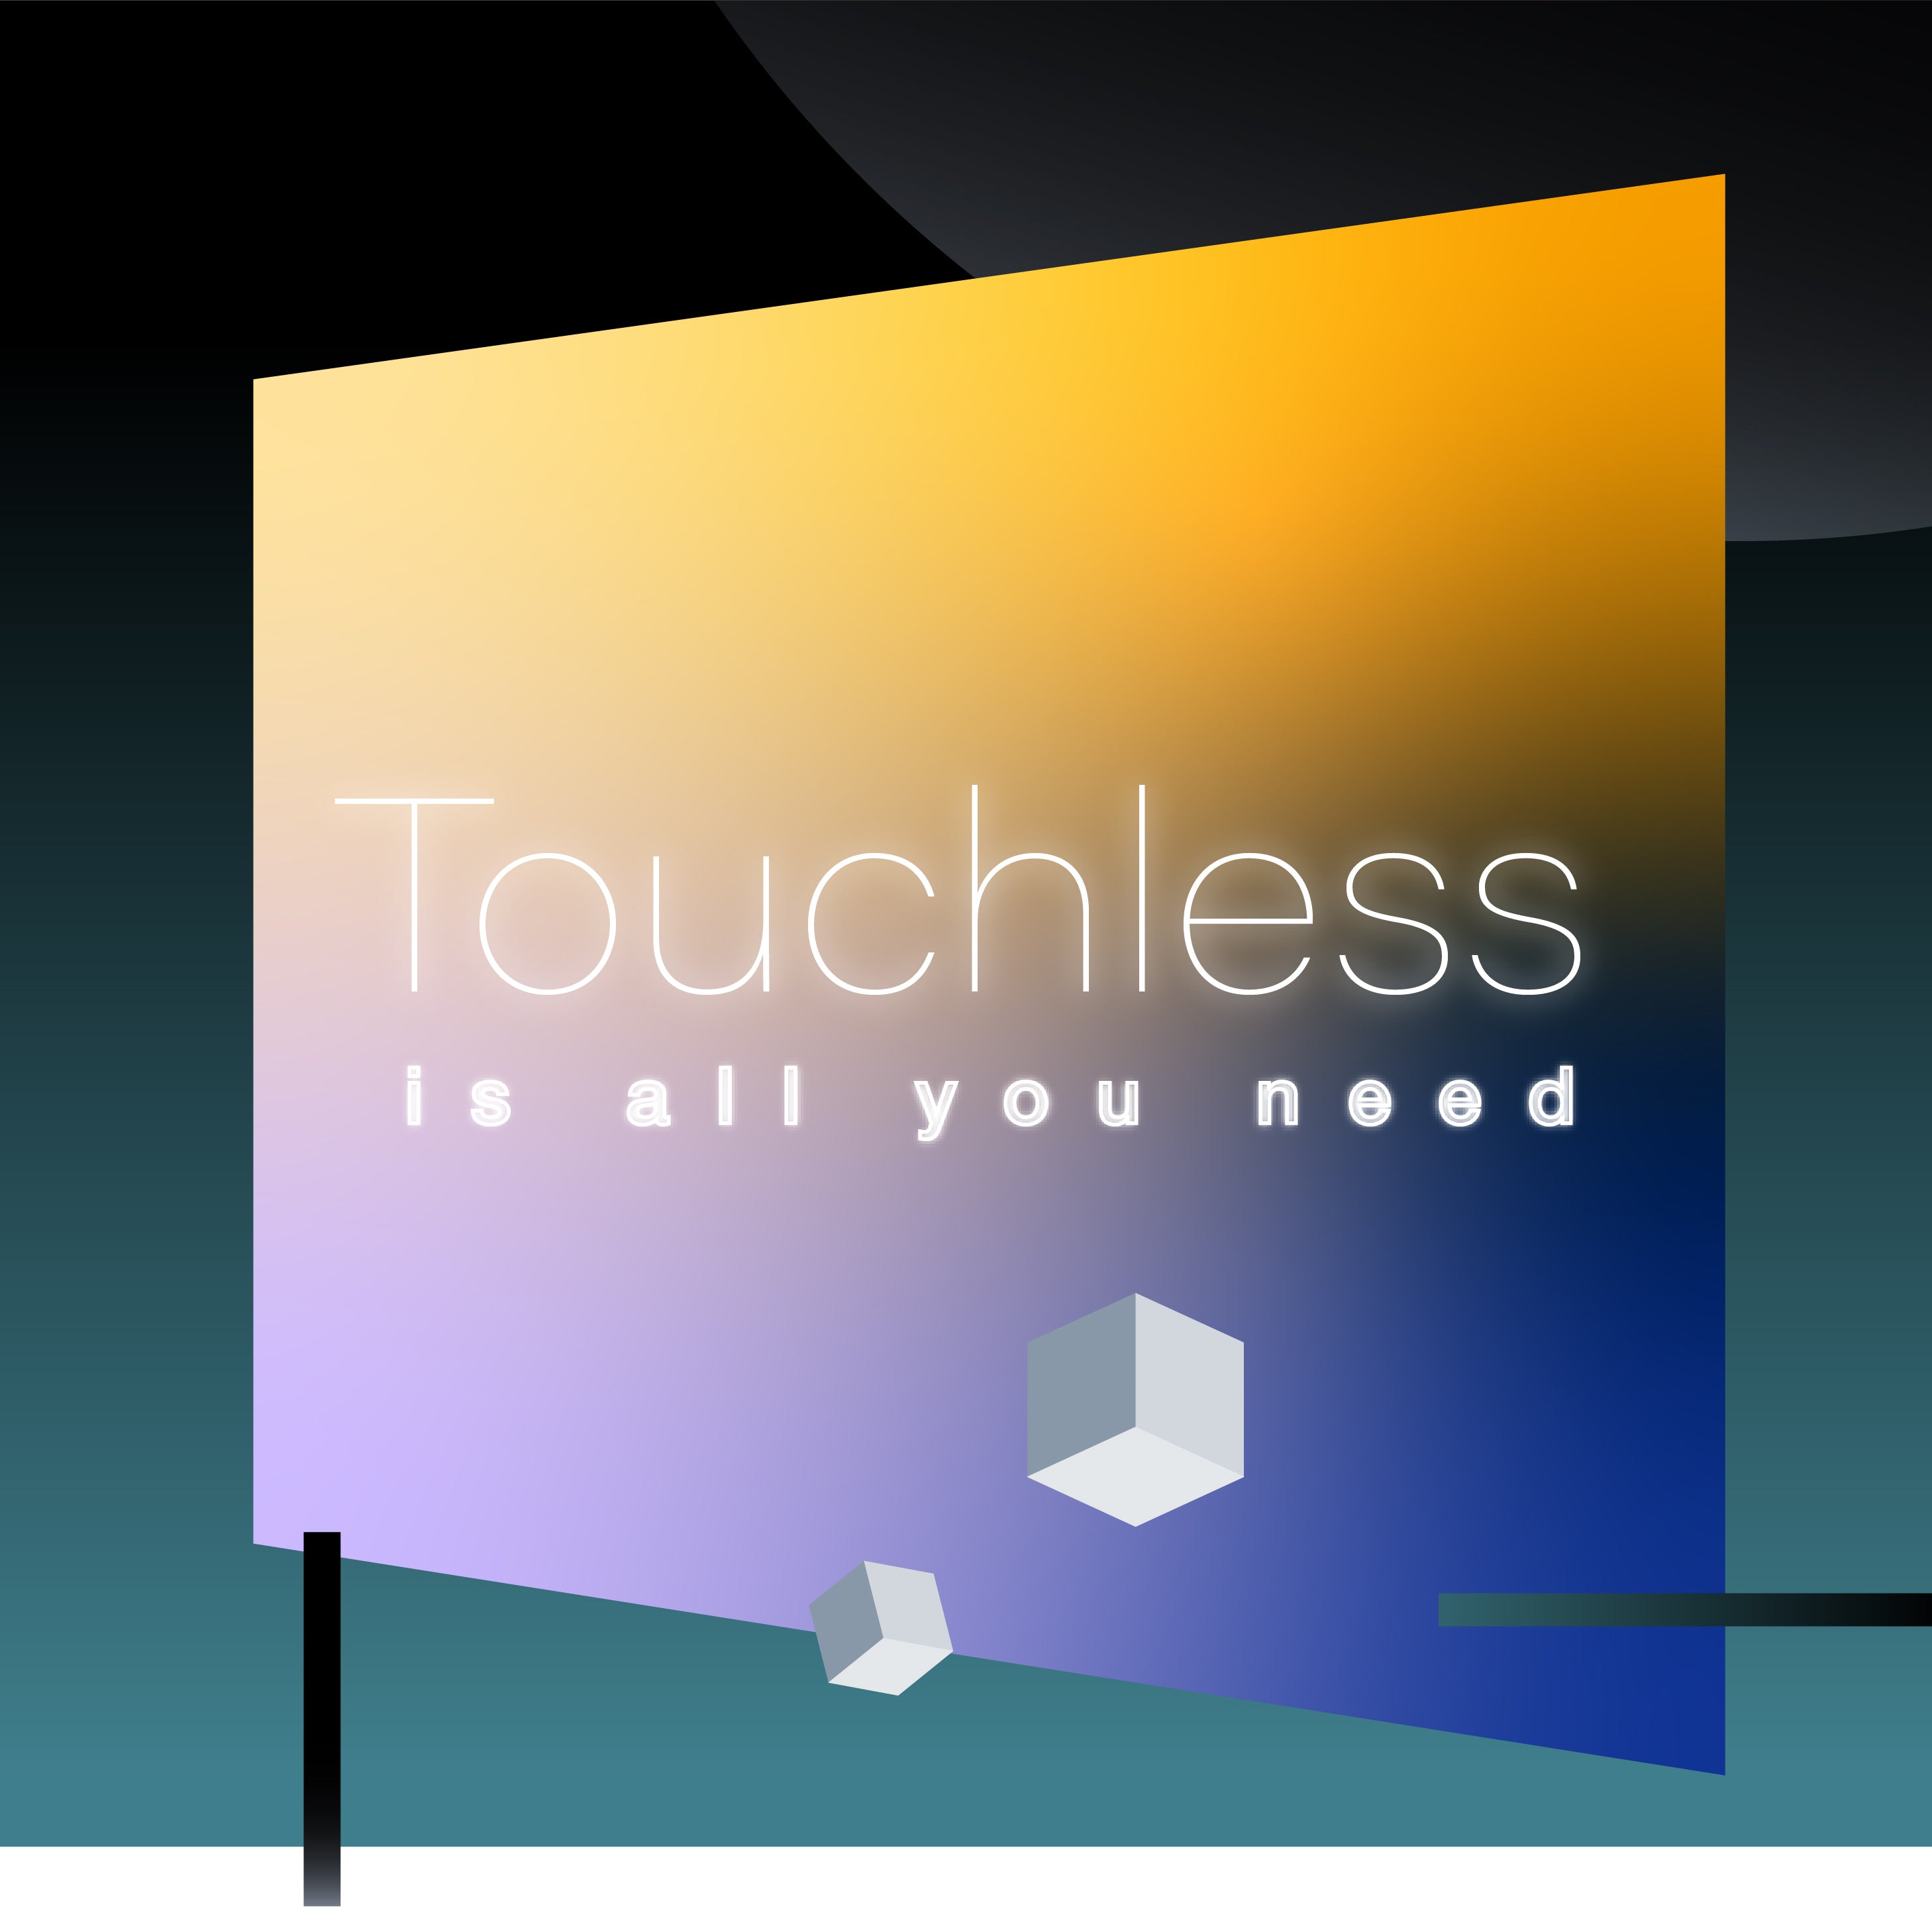 Touchless is all you need